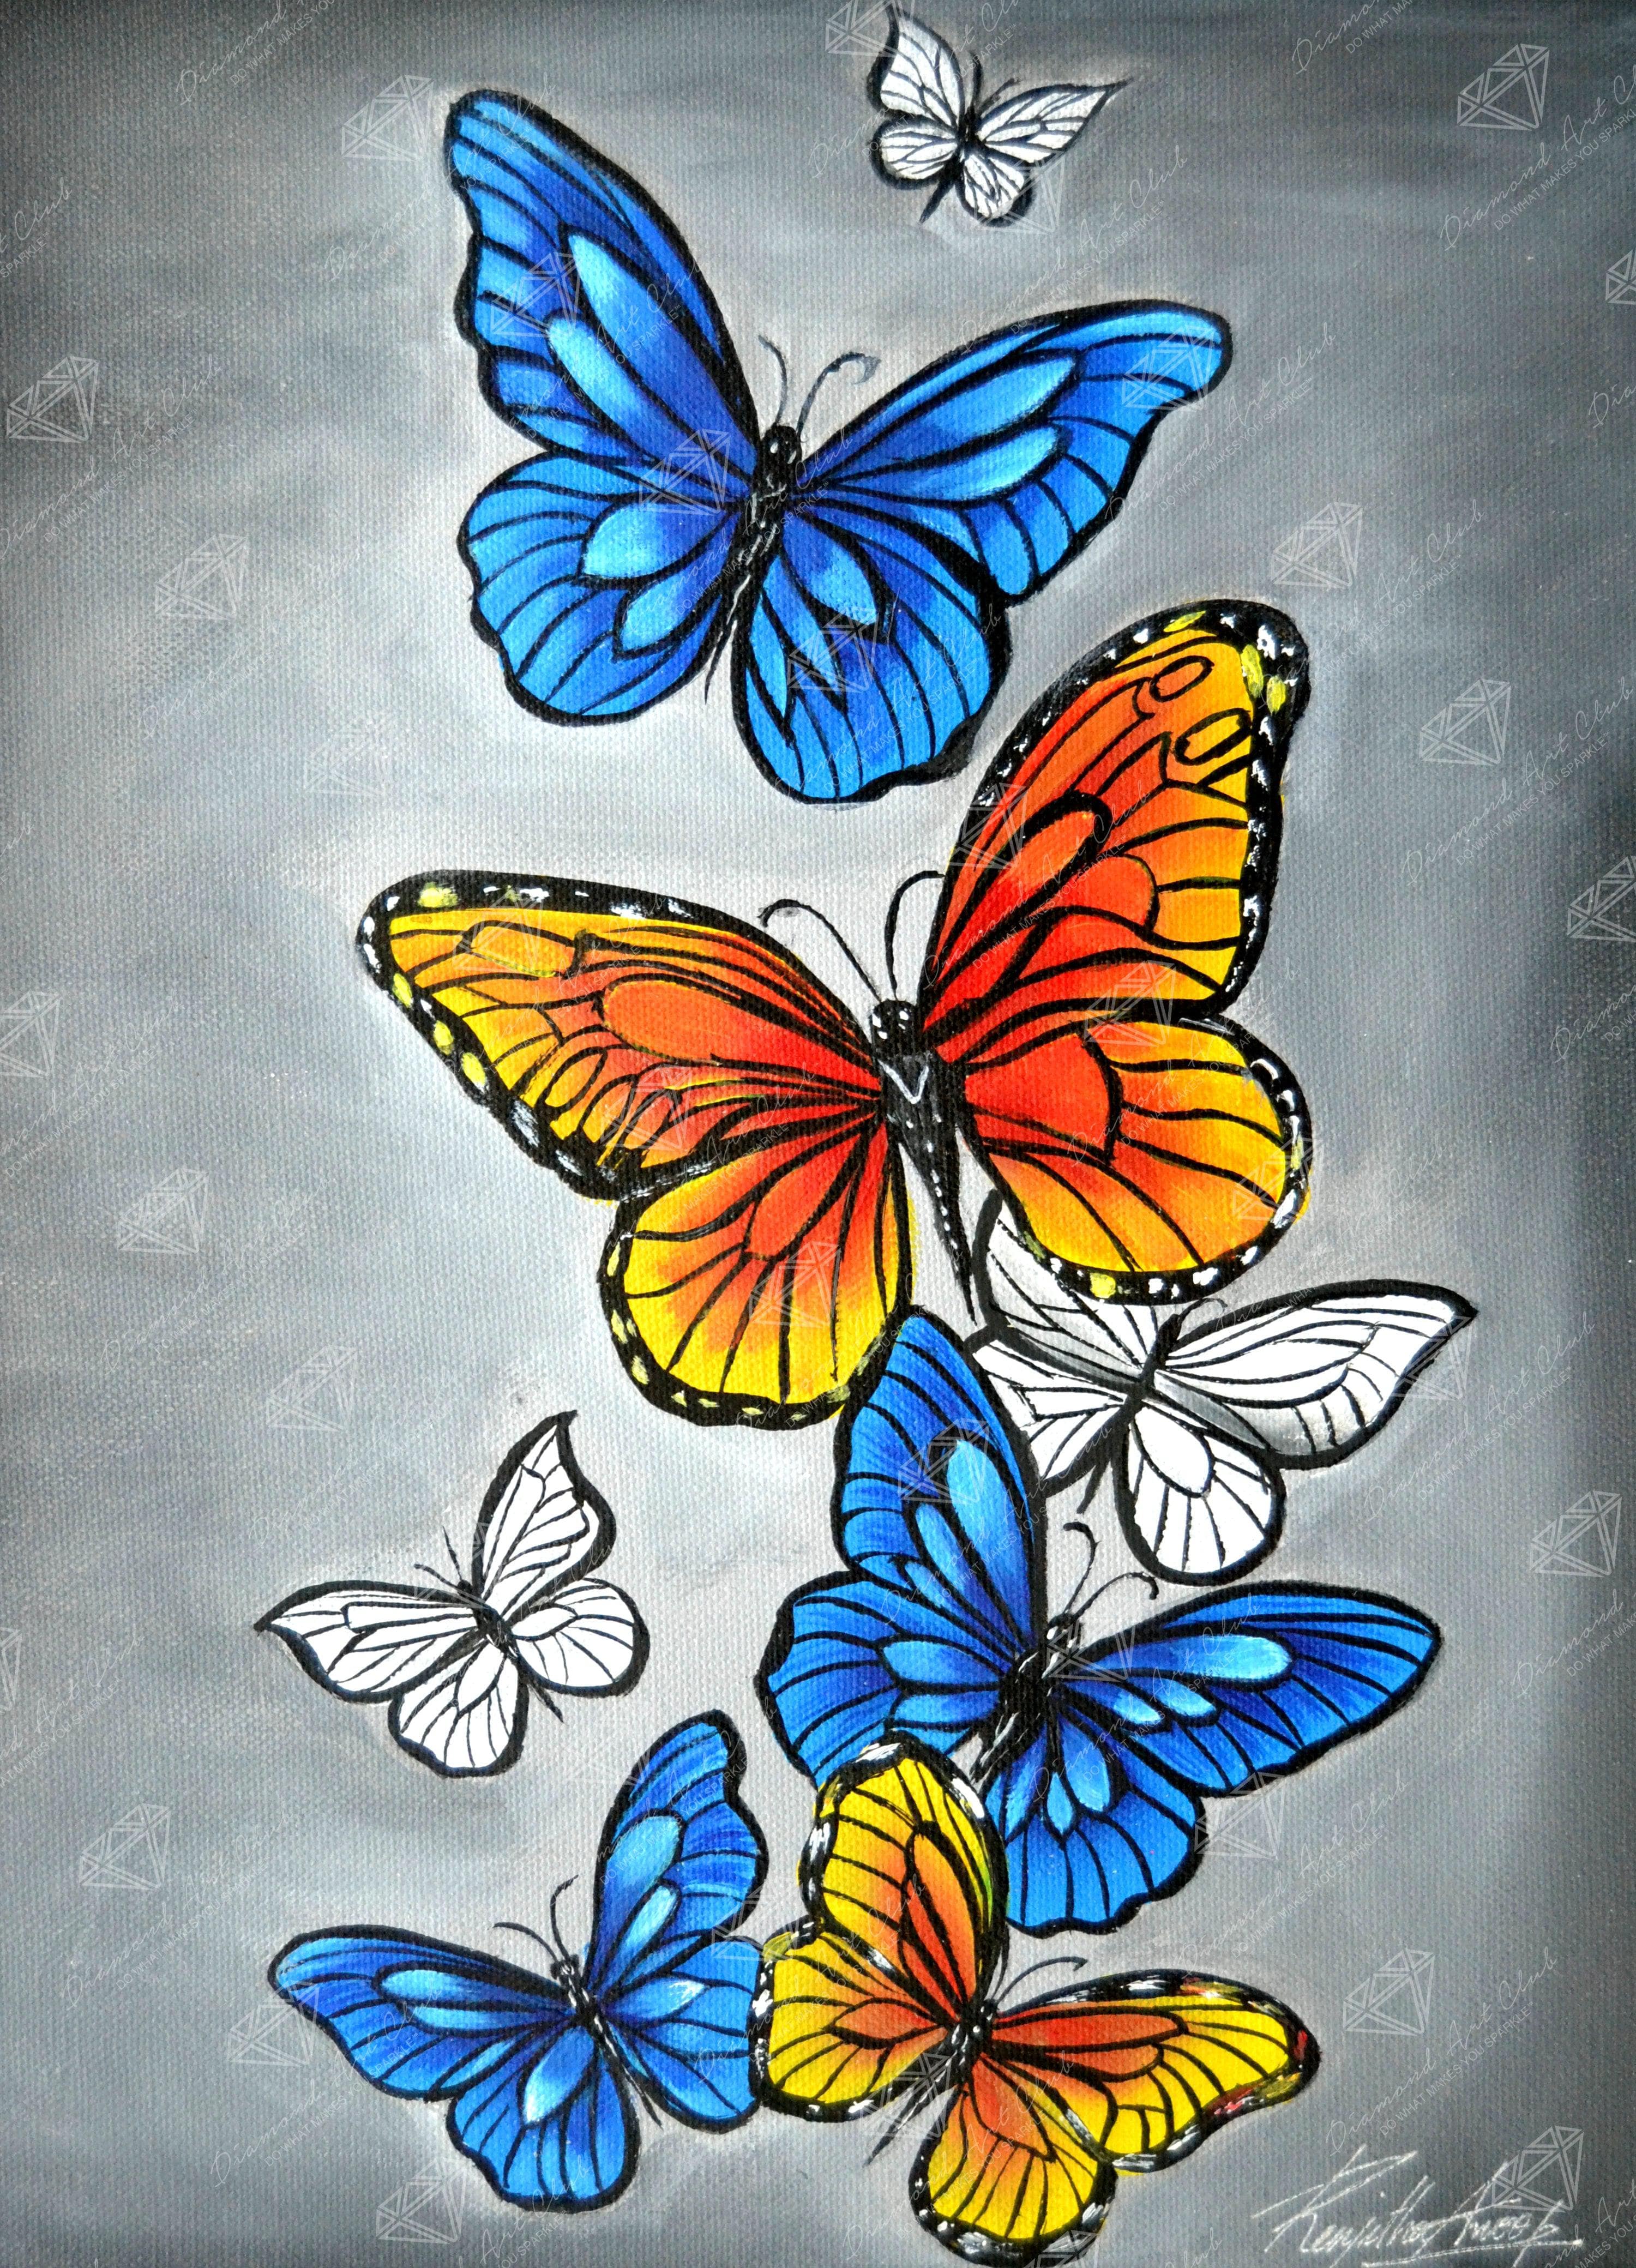 Heart and Butterfly - Full Round - Diamond Painting(50*60cm)